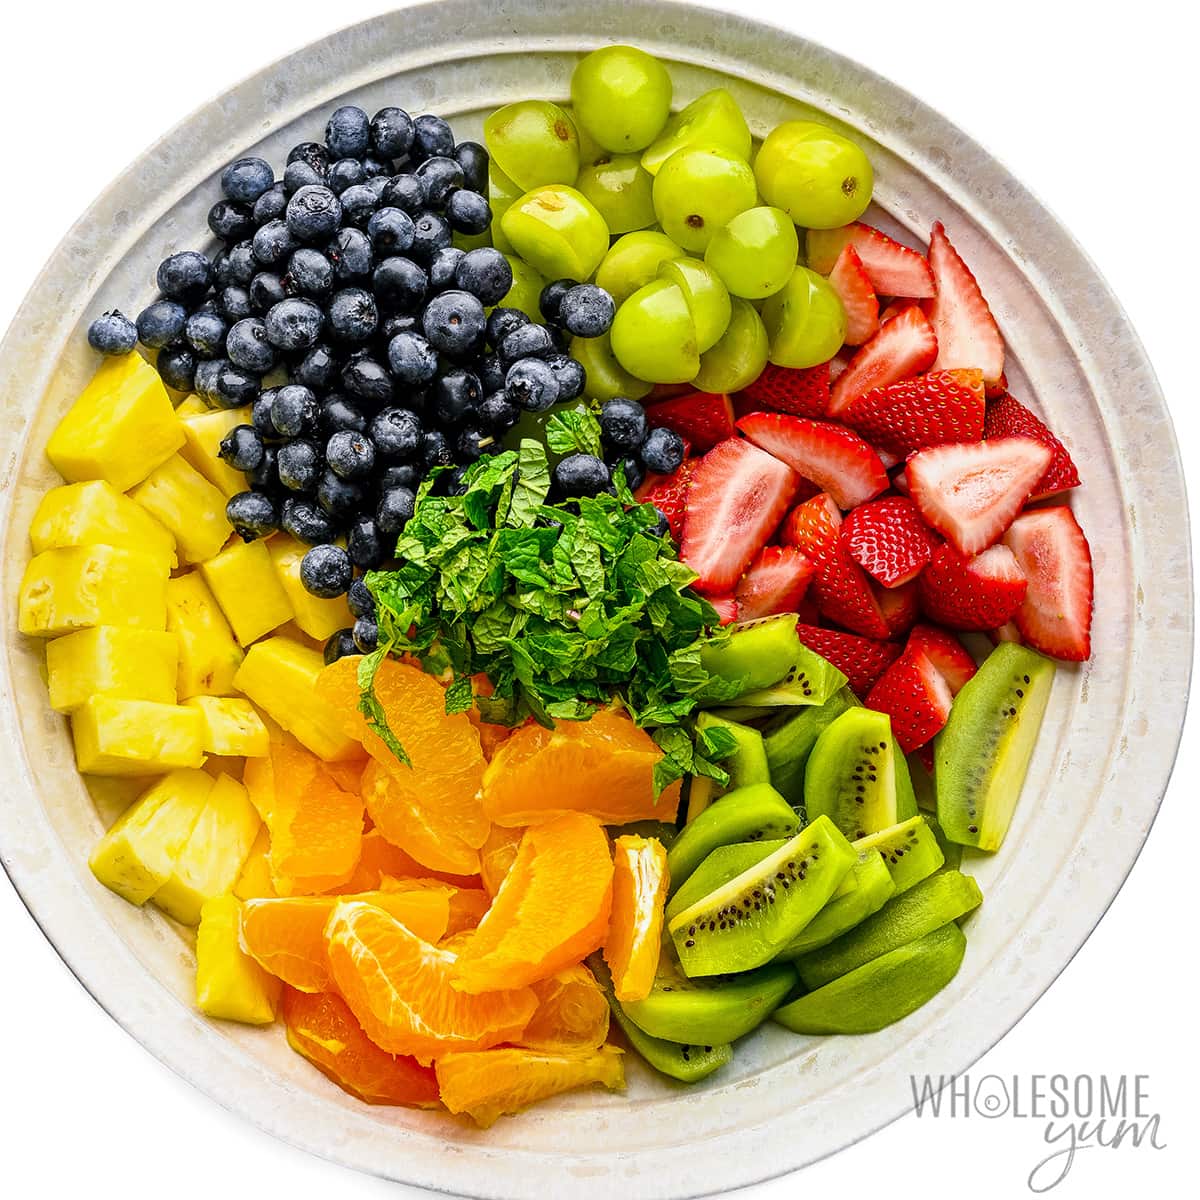 Pineapple, mandarin oranges, kiwi, strawberries, blueberries, grapes, and mint in a bowl.